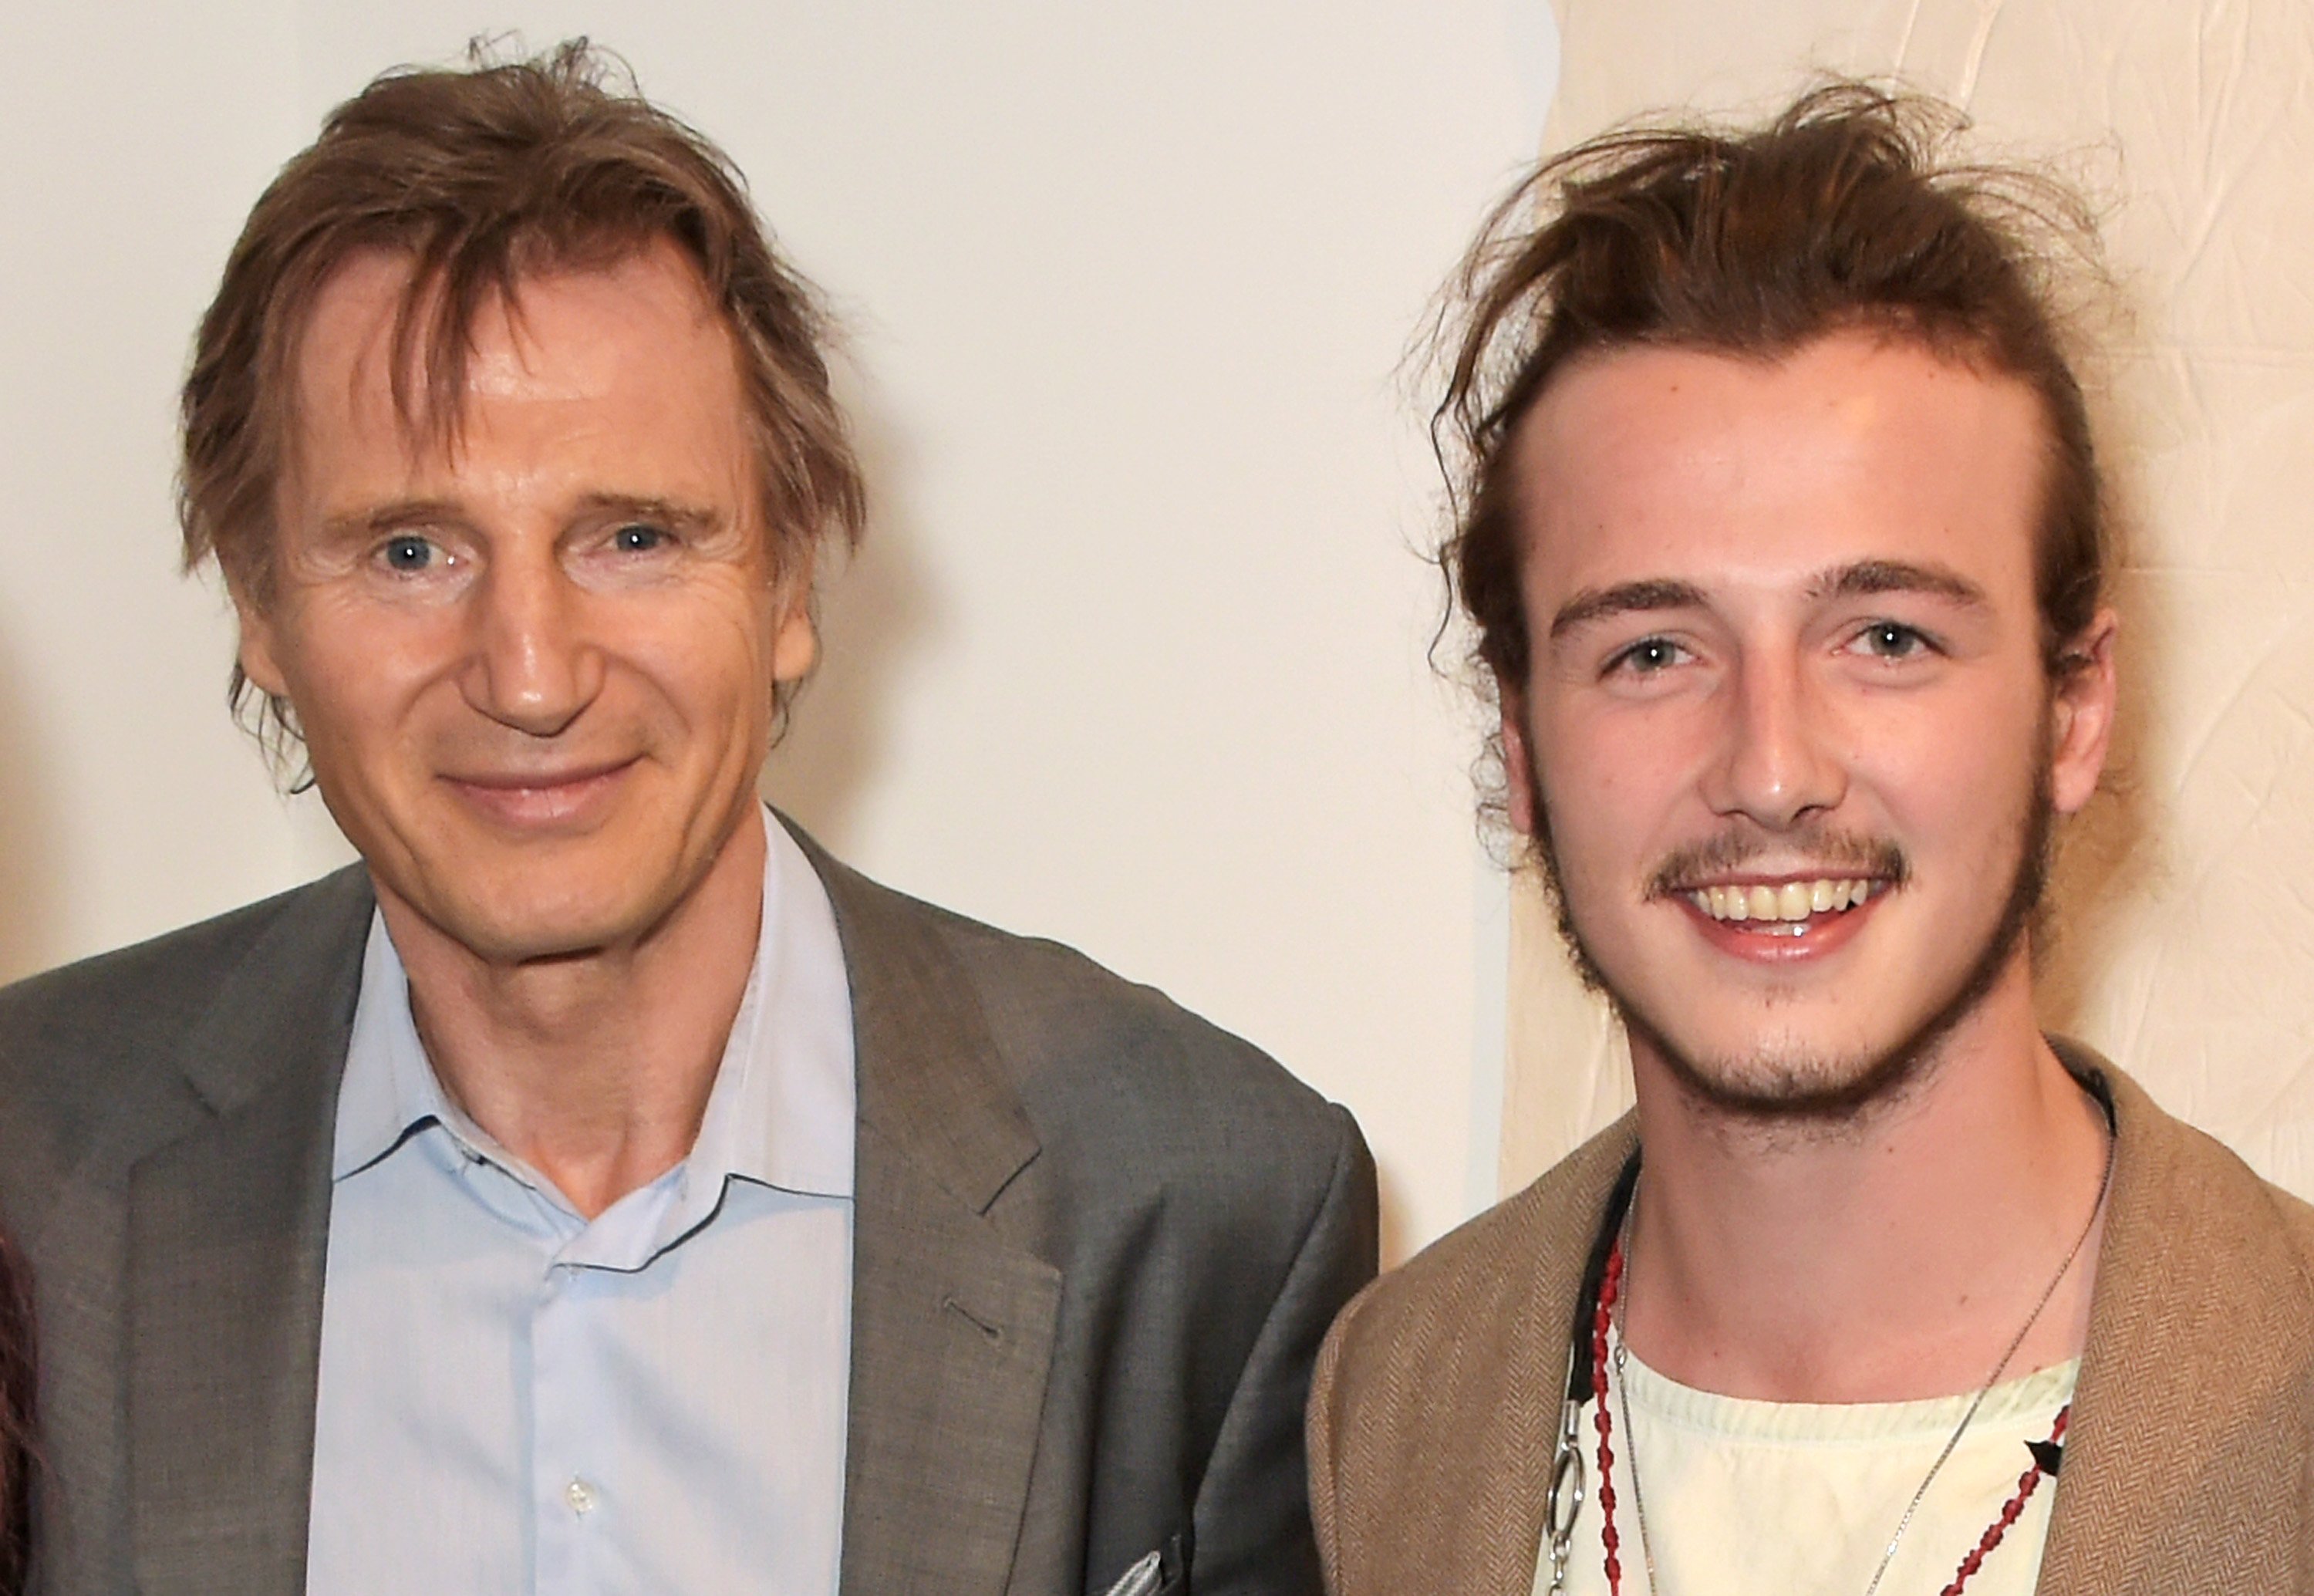 Liam Neeson and Micheál Richardson at the Maison Mais Non launch party on June 2, 2015 | Source: Getty Images